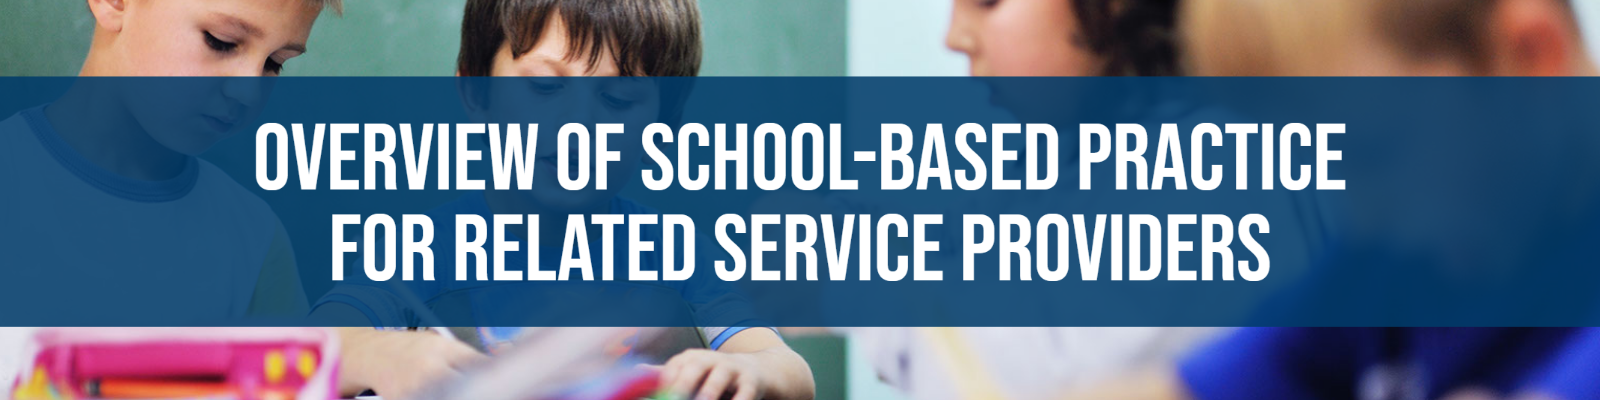 Overview of School-Based Practice for Related Service Providers